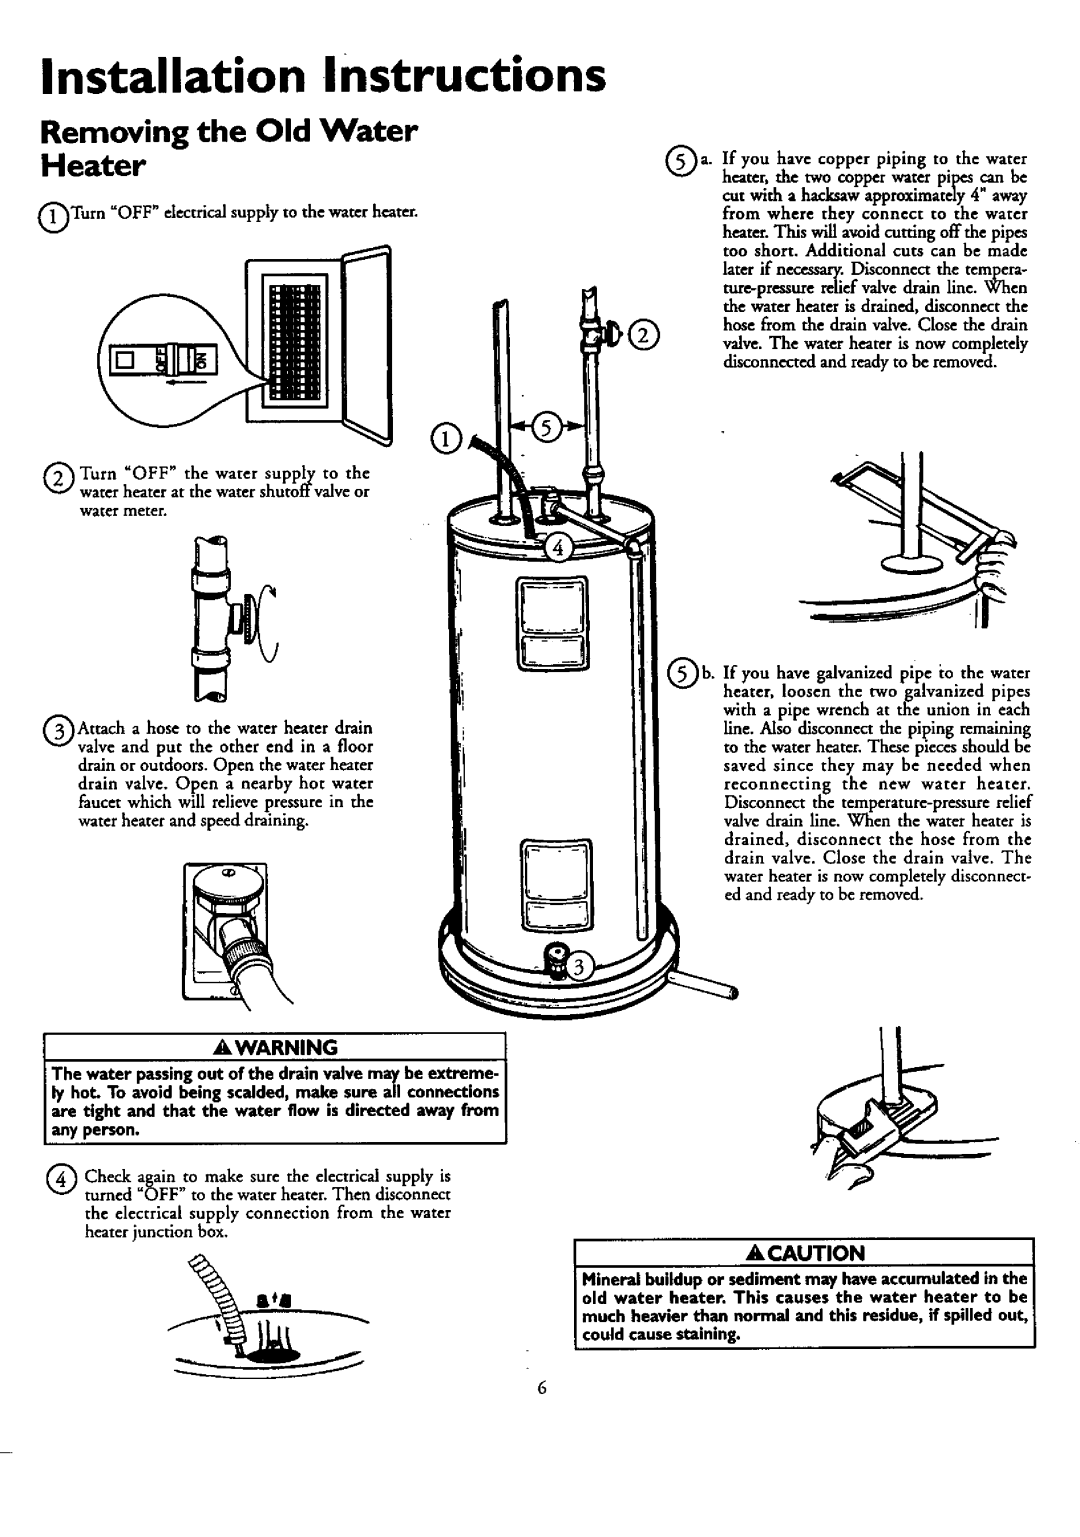 Kenmore 153.320390 HT 30 GAL, 153.37.0391HT 30 GAL Installation Instructions, Removing the Old Water Heater, Acaution 